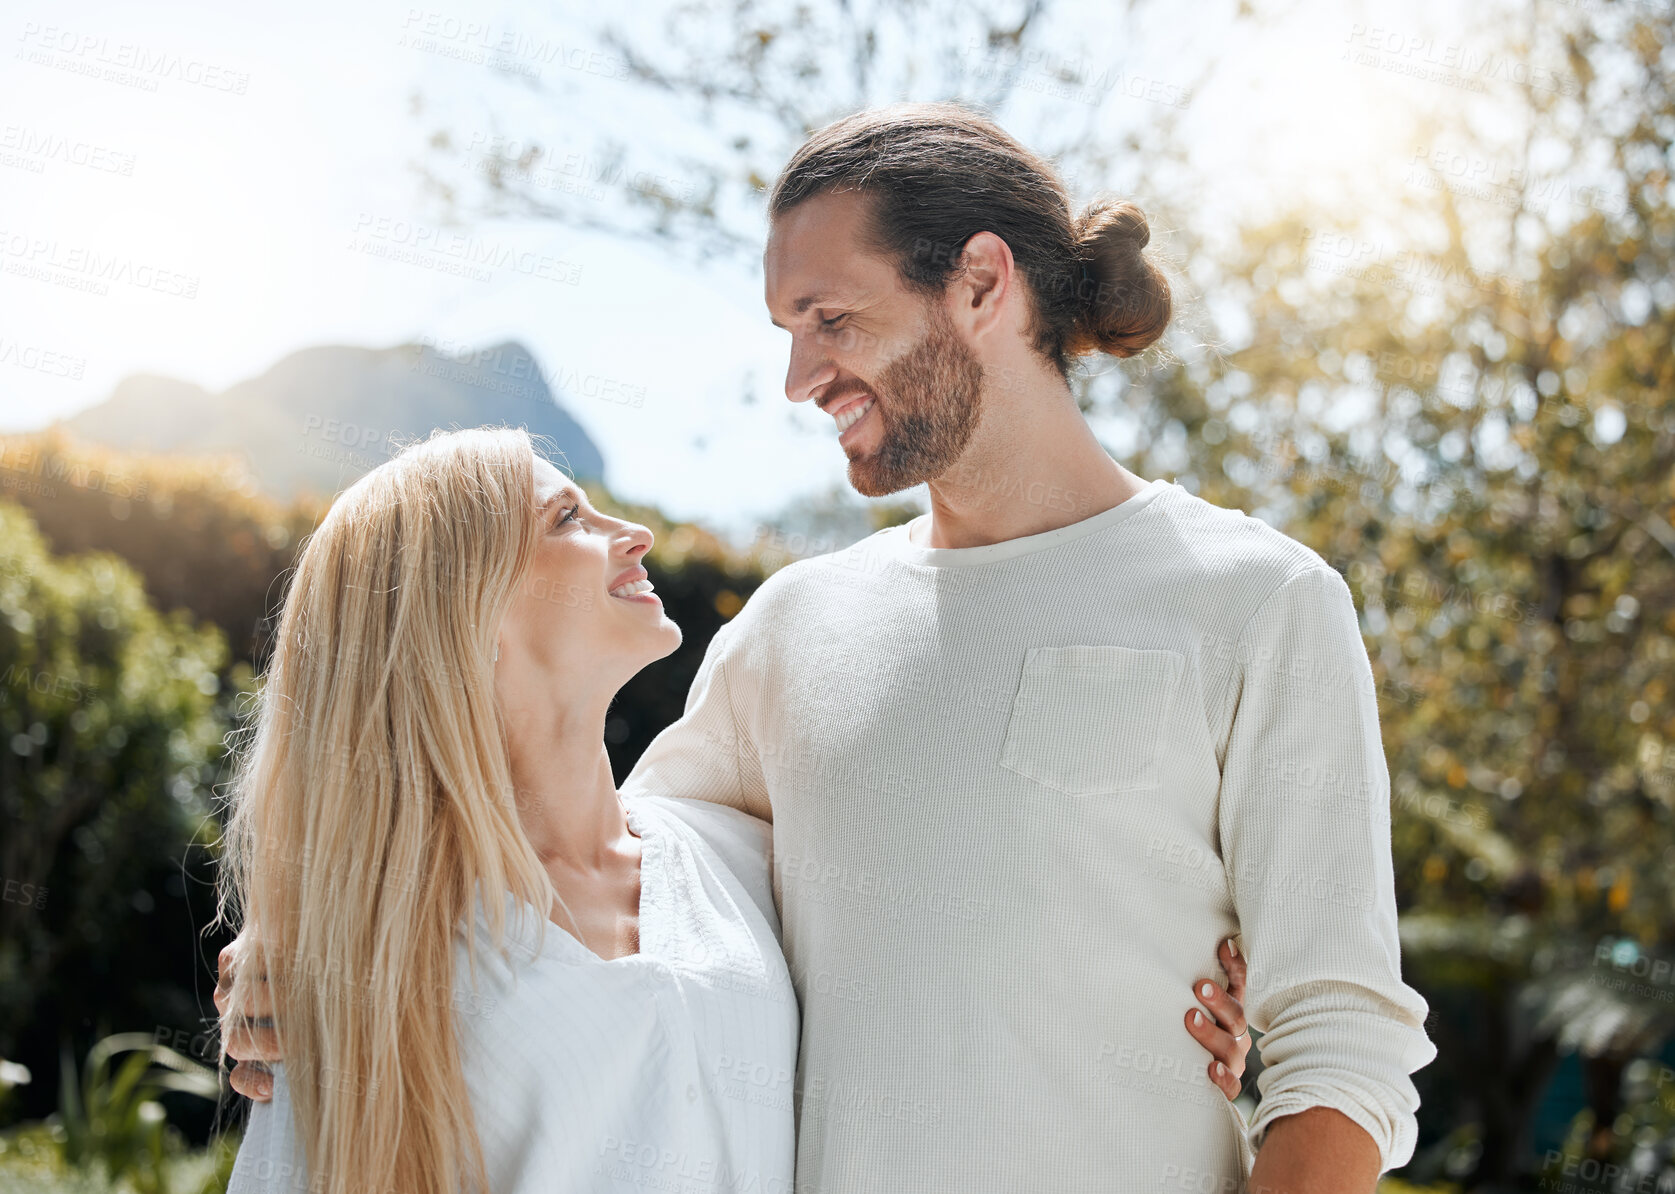 Buy stock photo Shot of an affectionate couple standing outside